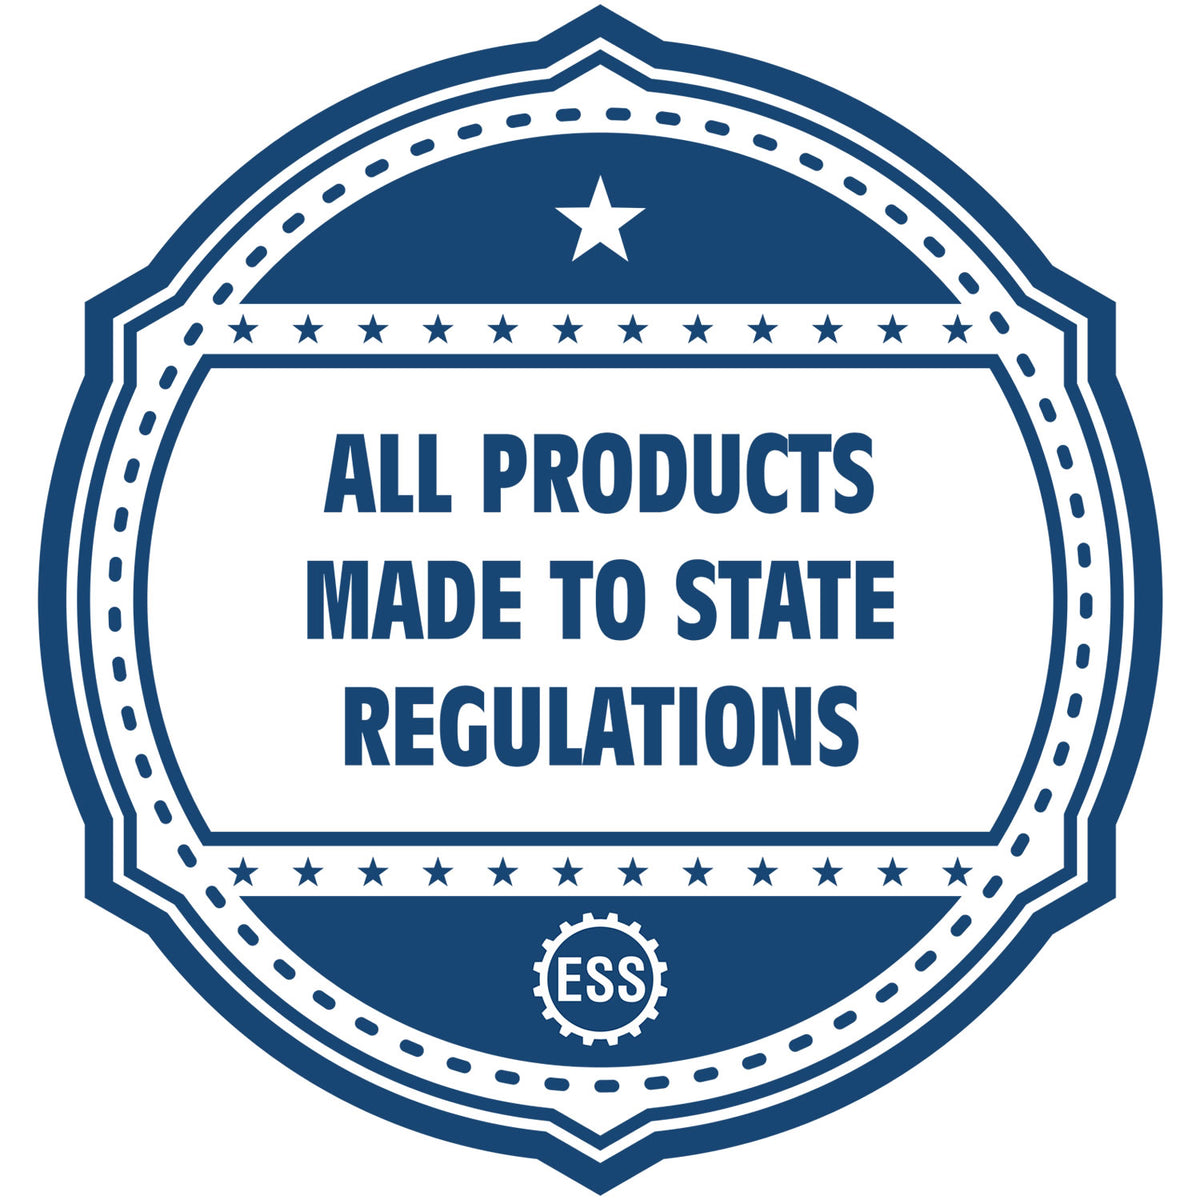 An icon or badge element for the State of Virginia Architectural Seal Embosser showing that this product is made in compliance with state regulations.